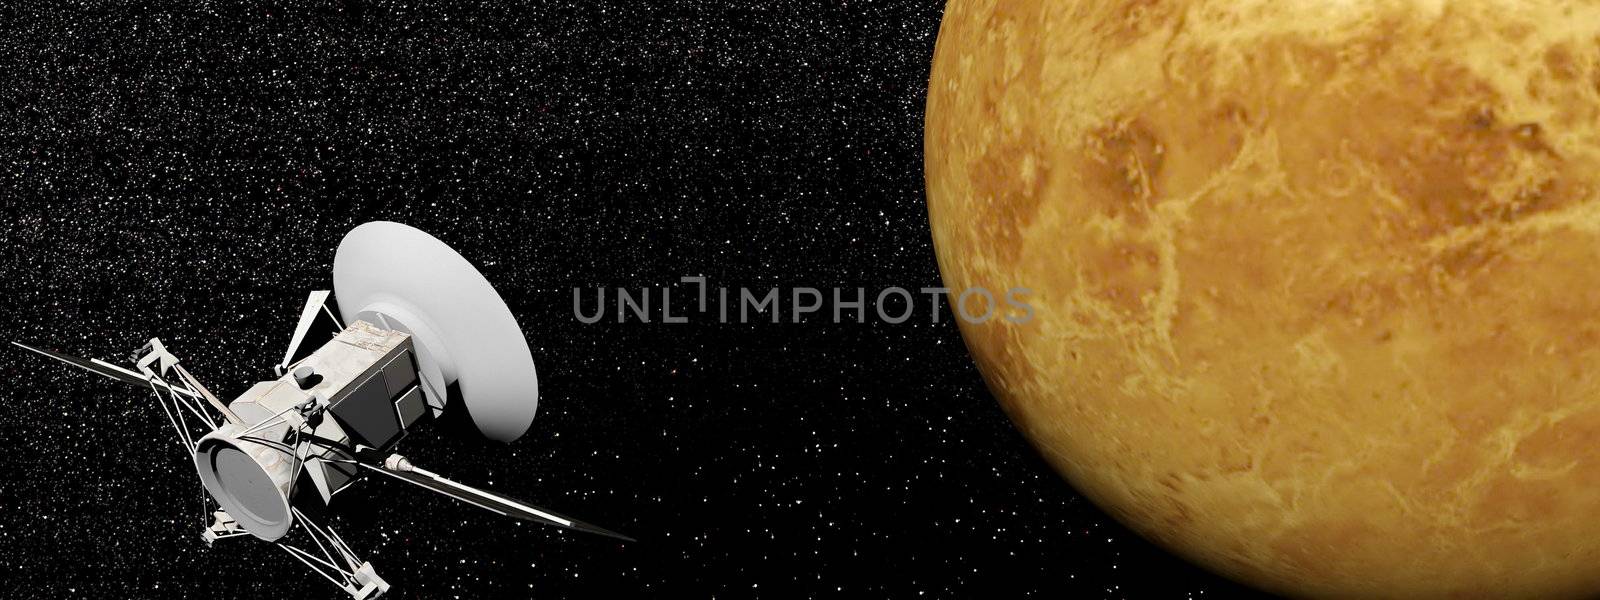 Magellan spacecraft near Venus planet by night - Elements of this image furnished by NASA